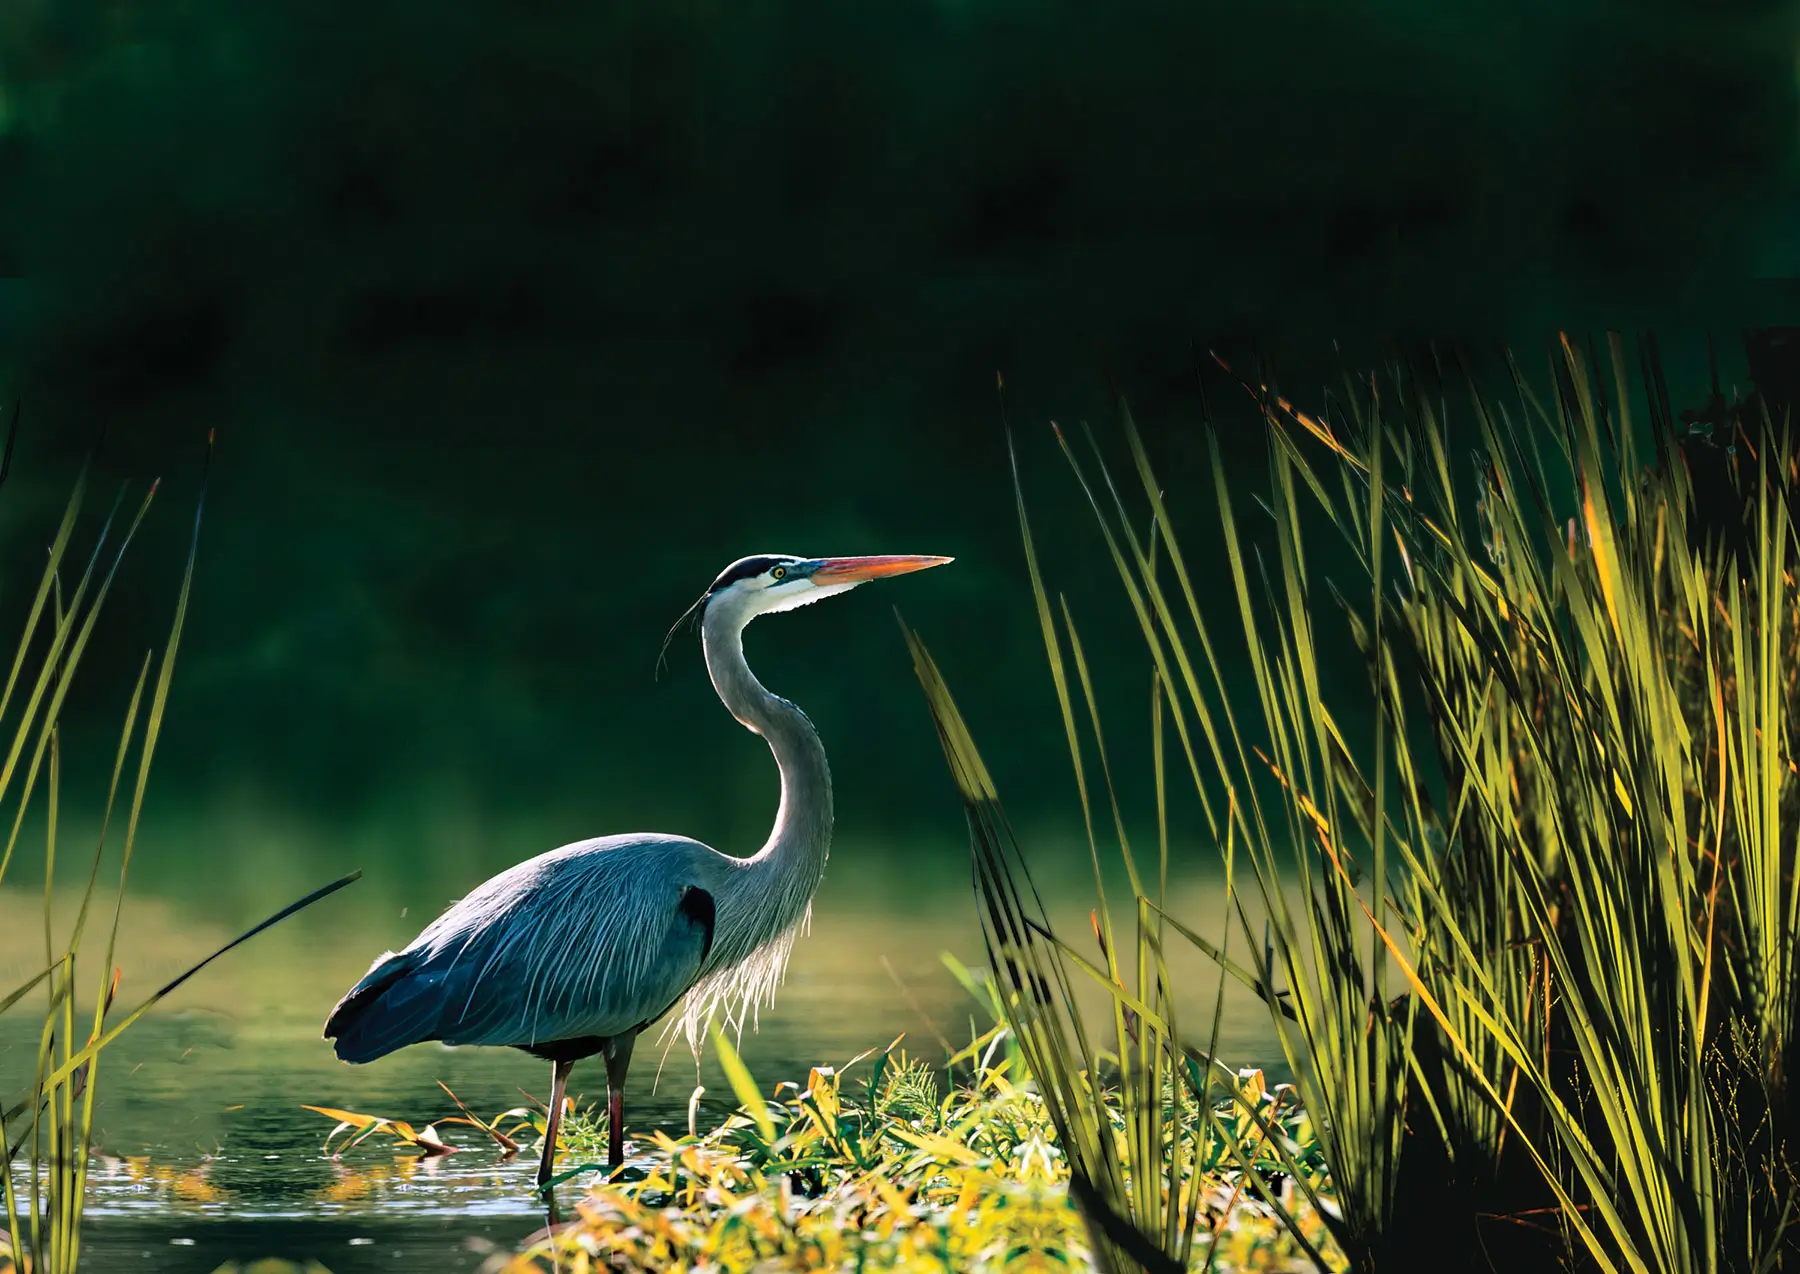 A heron in the wetlands - North River Ranch, Parrish, FL